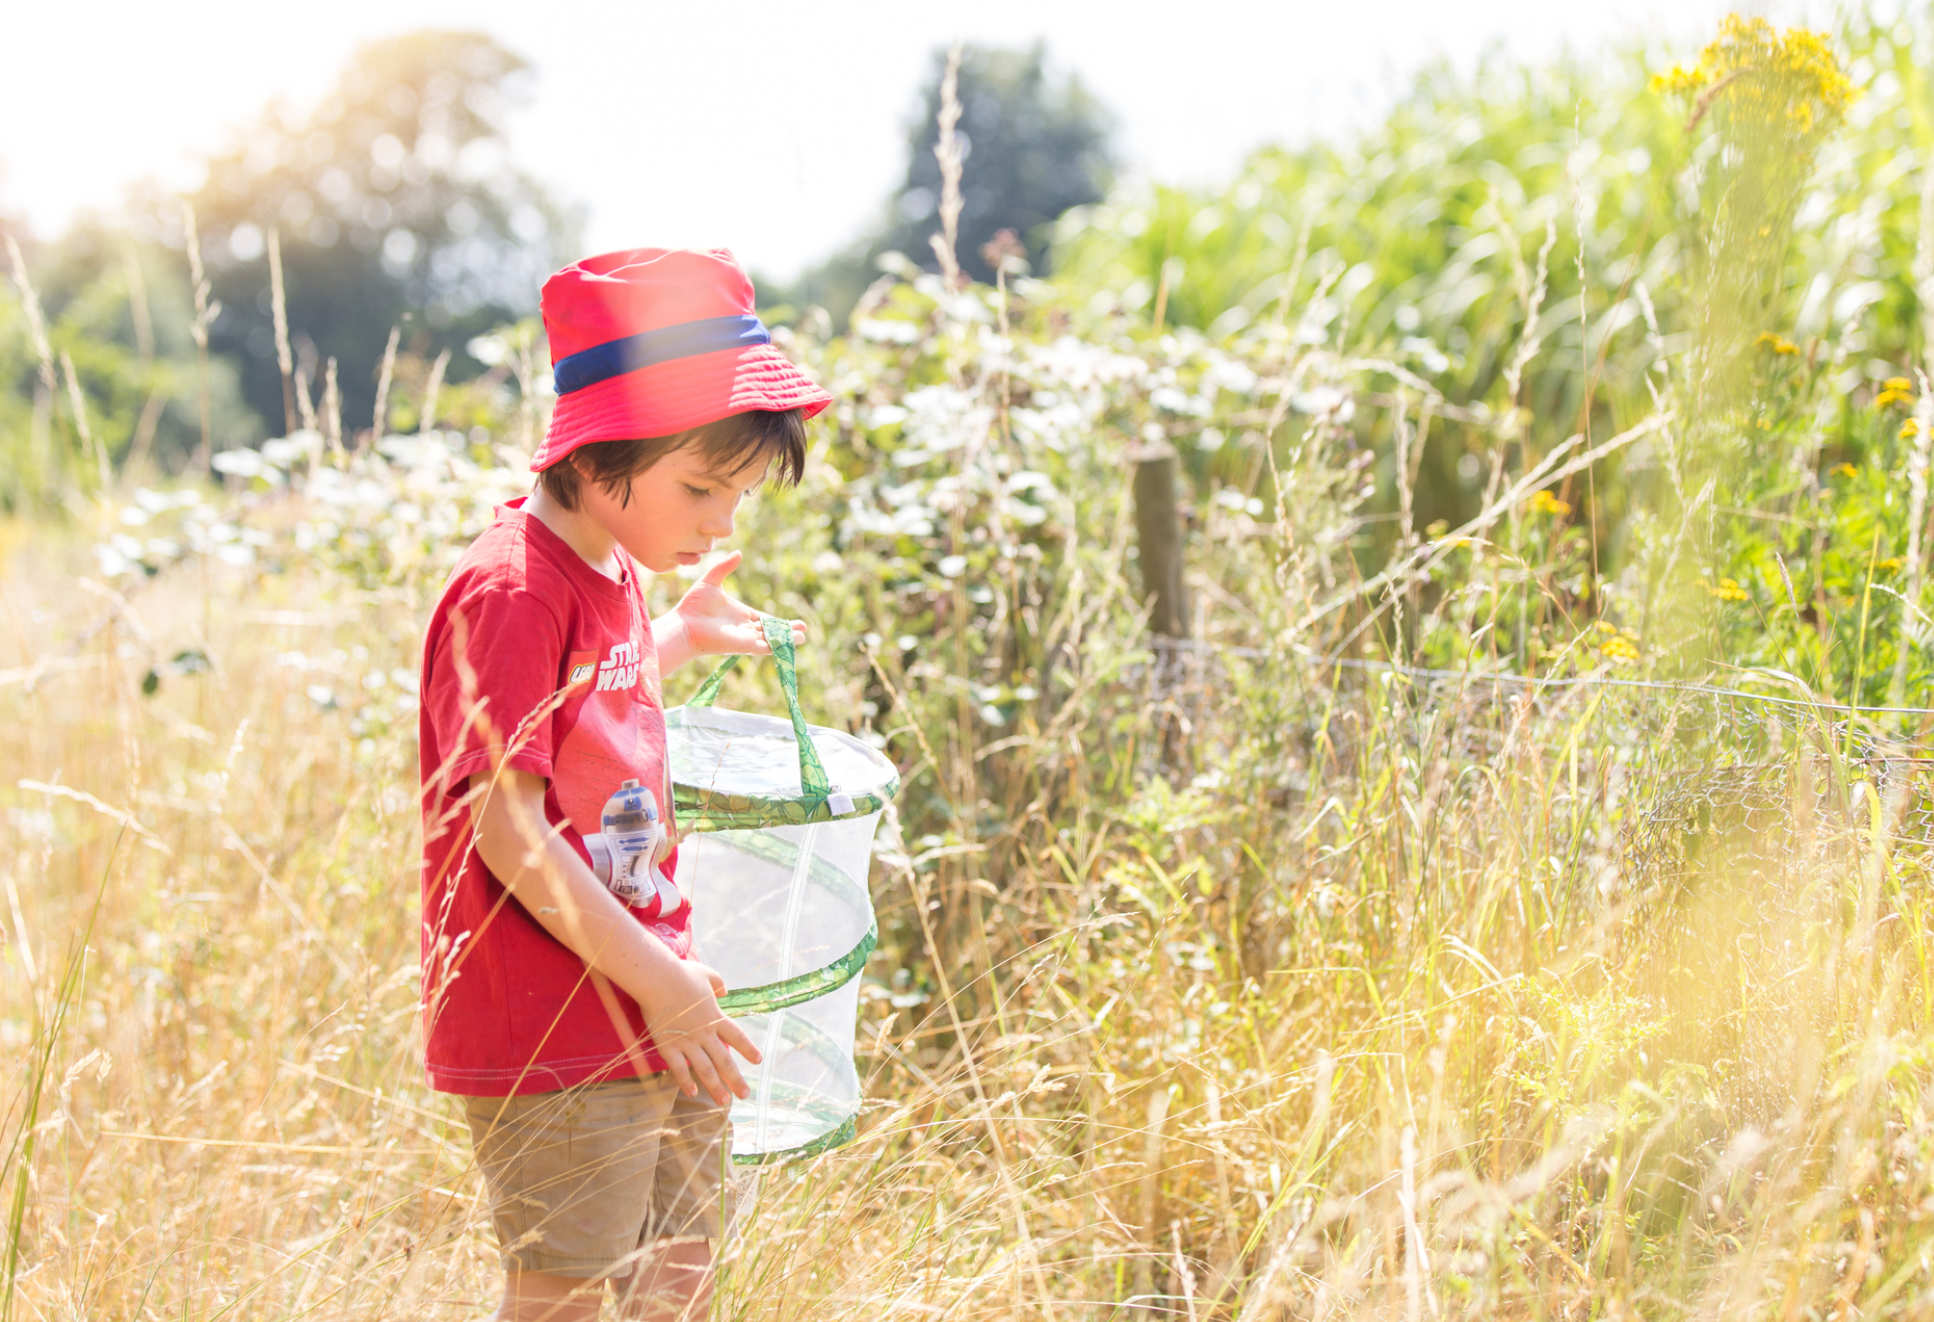 A child searches in long grass with an insect net